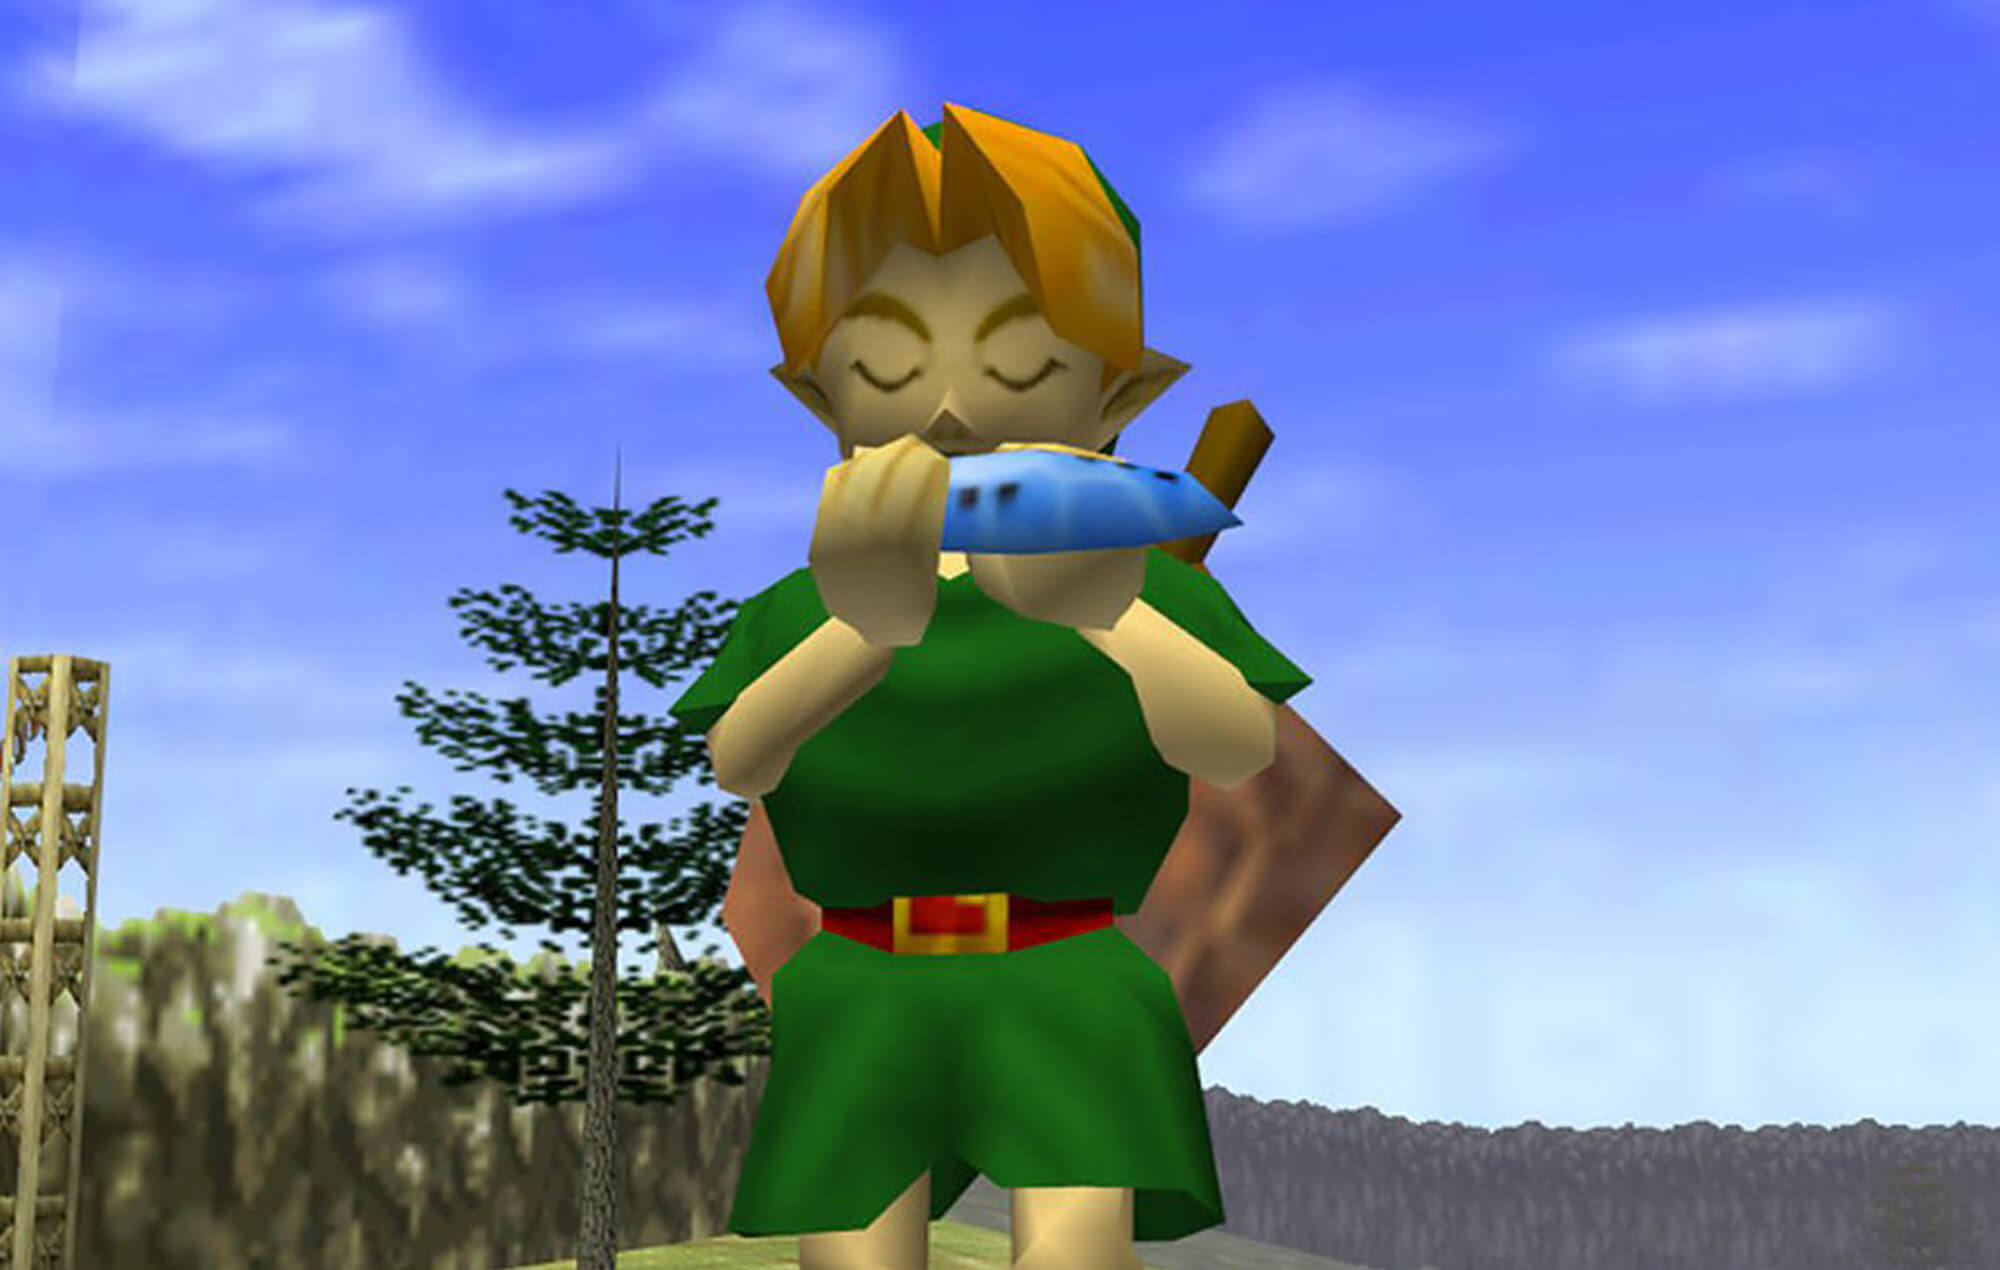 'Legend of Zelda: Ocarina of Time' and the unobtainable Triforce